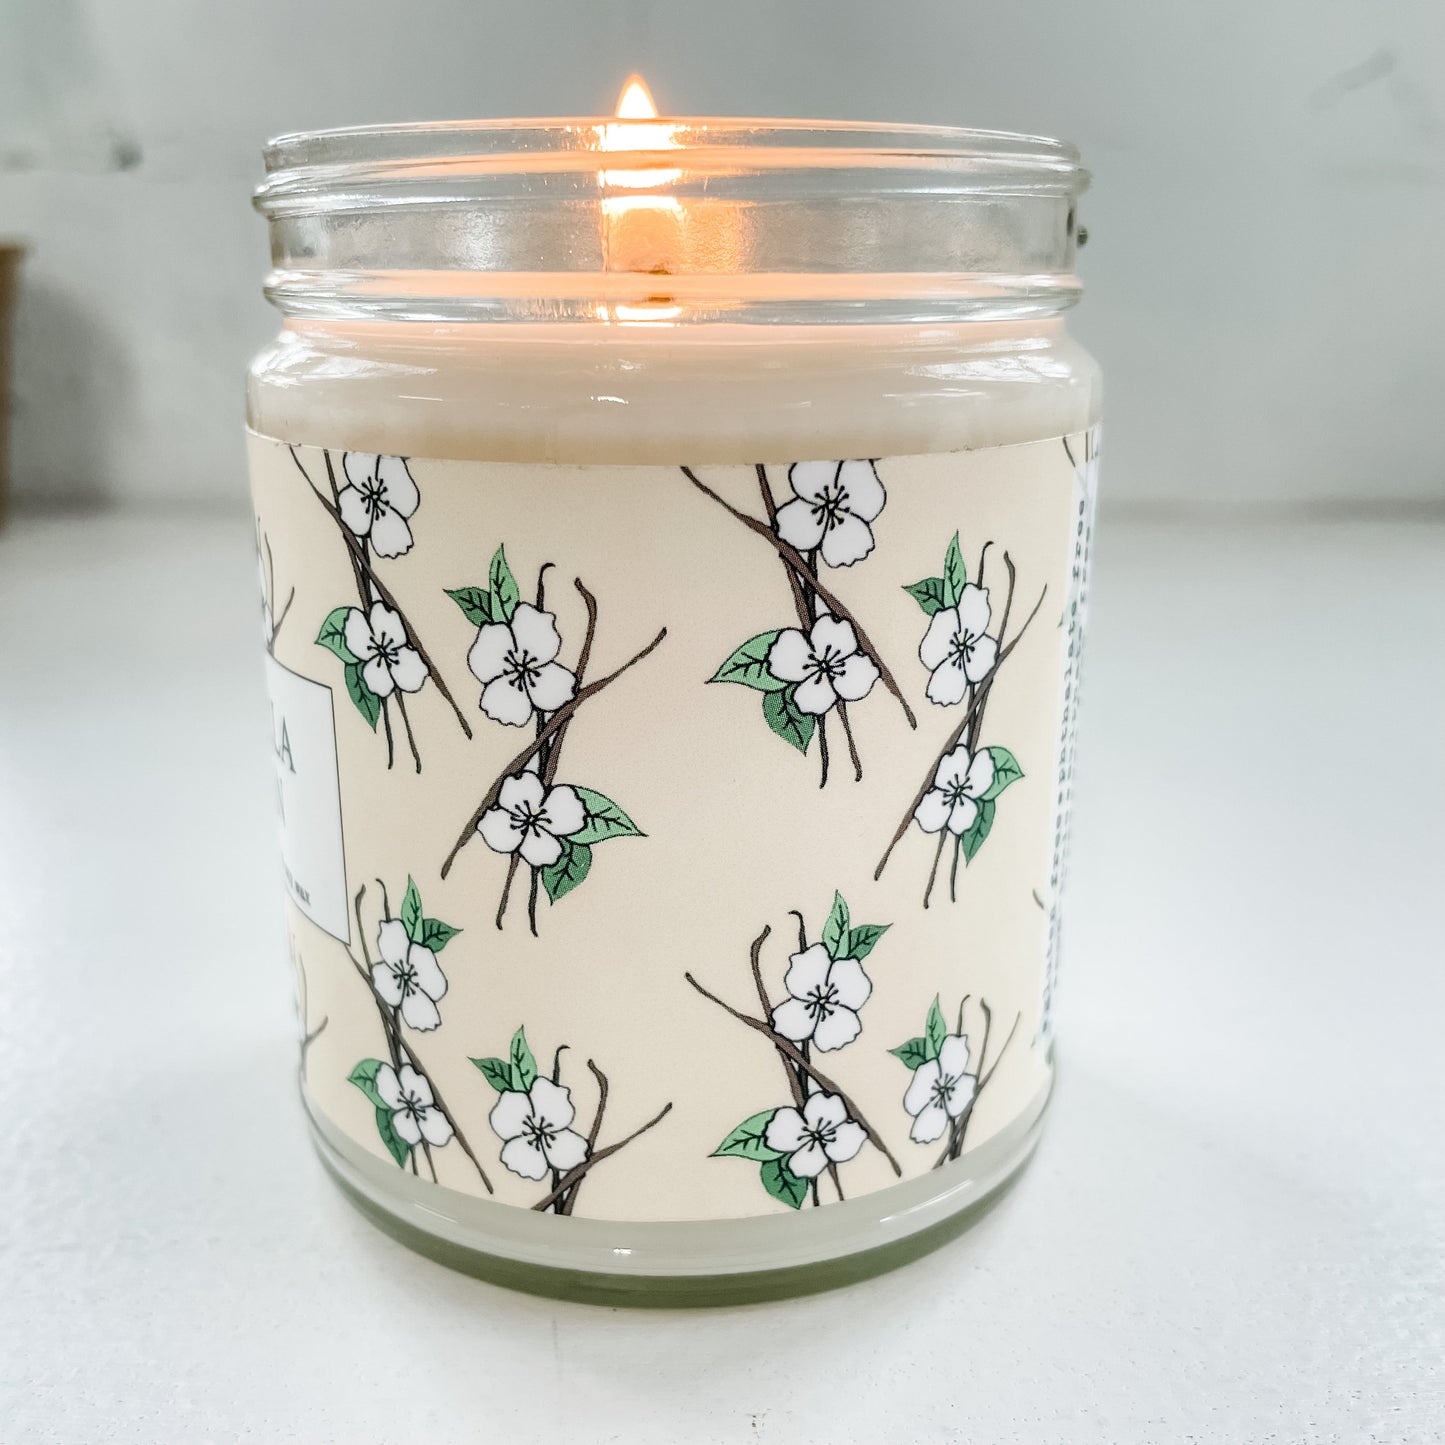 Vanilla Bean Scented Candle - 9oz Glass Jar Soy Candle